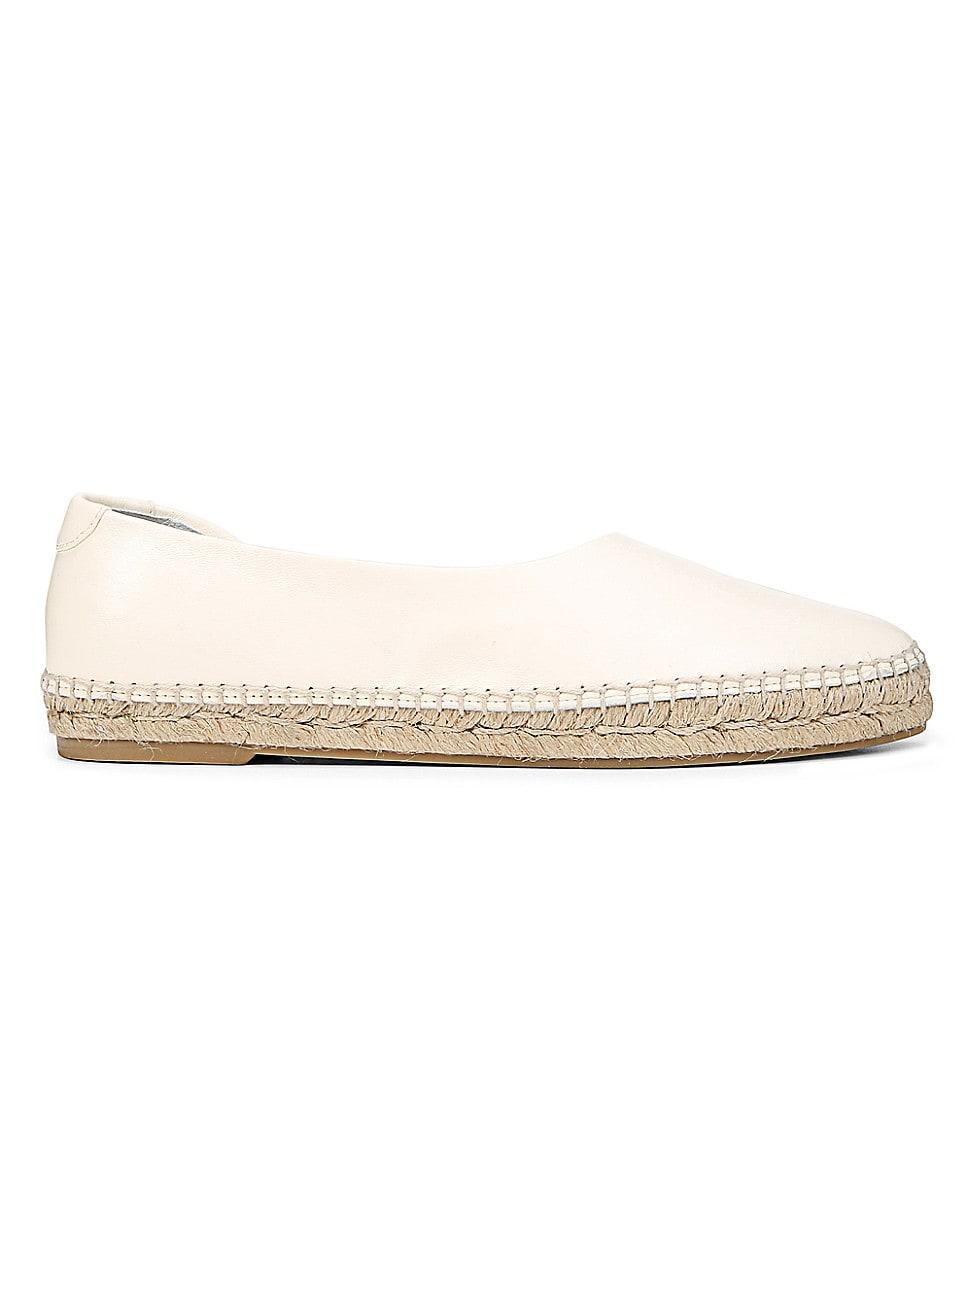 Vince Tita Leather D'orsay Espadrilles in Natural | Lyst